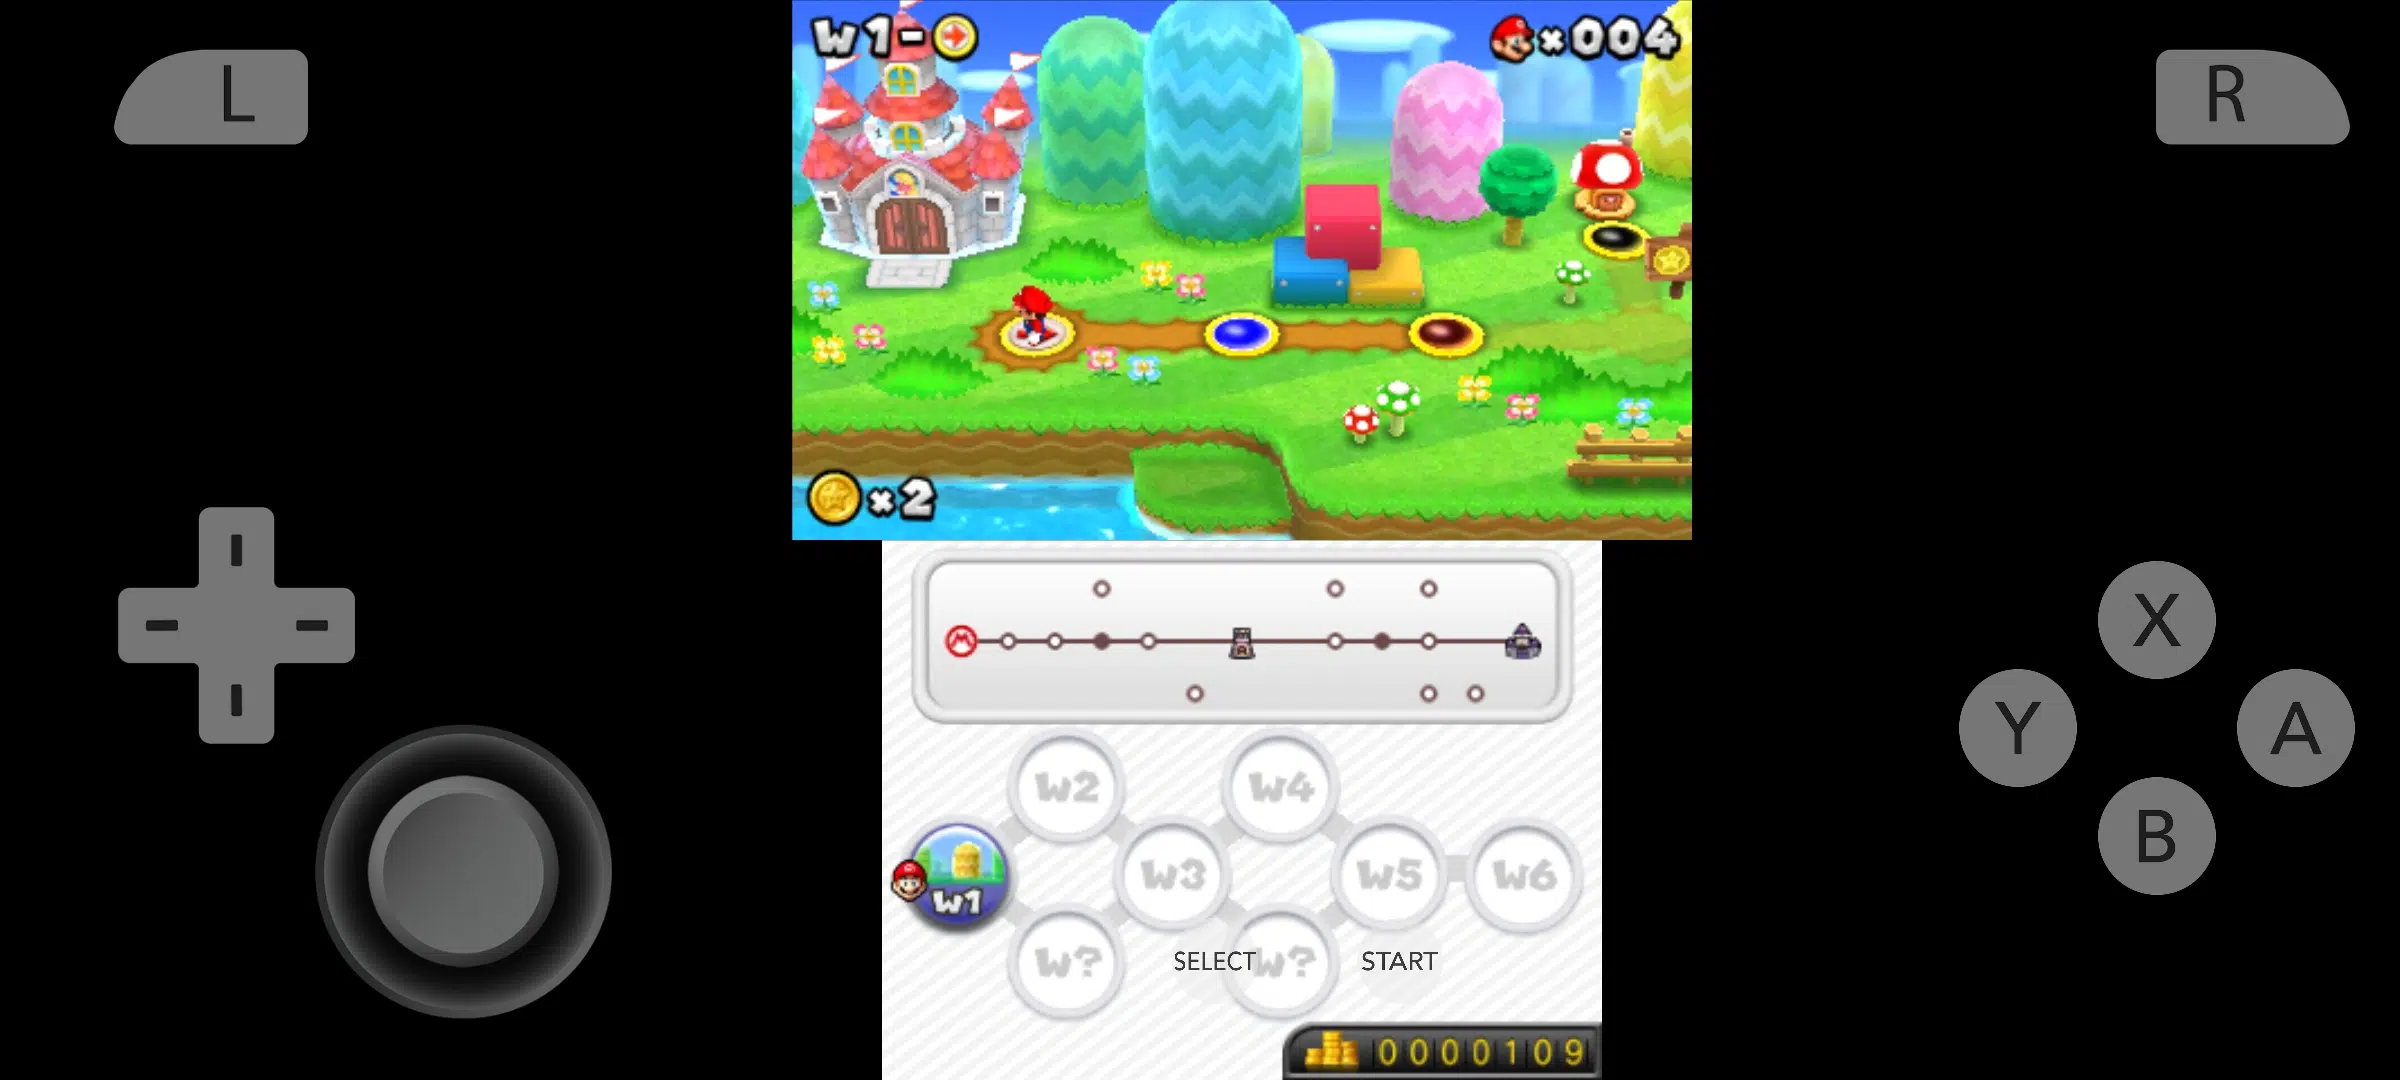 New Super Mario Bros 2 APK + OBB Download For Android Offline - Citra 3DS Emulator Android